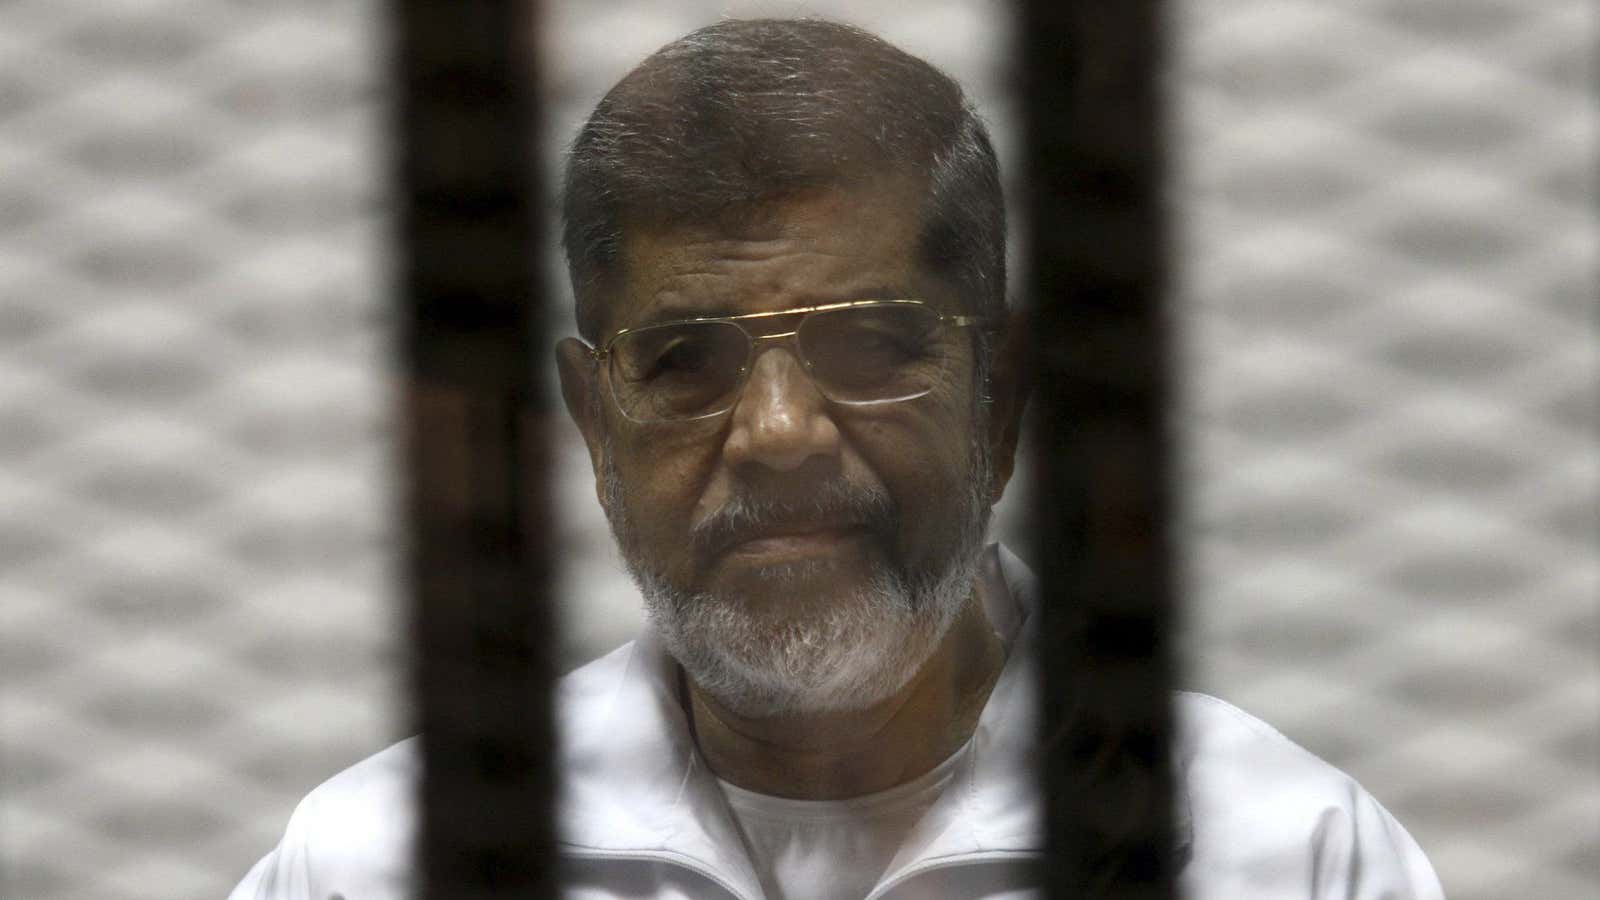 Ousted Egyptian president Mohamed Morsi behind bars during trial in Cairo this month.